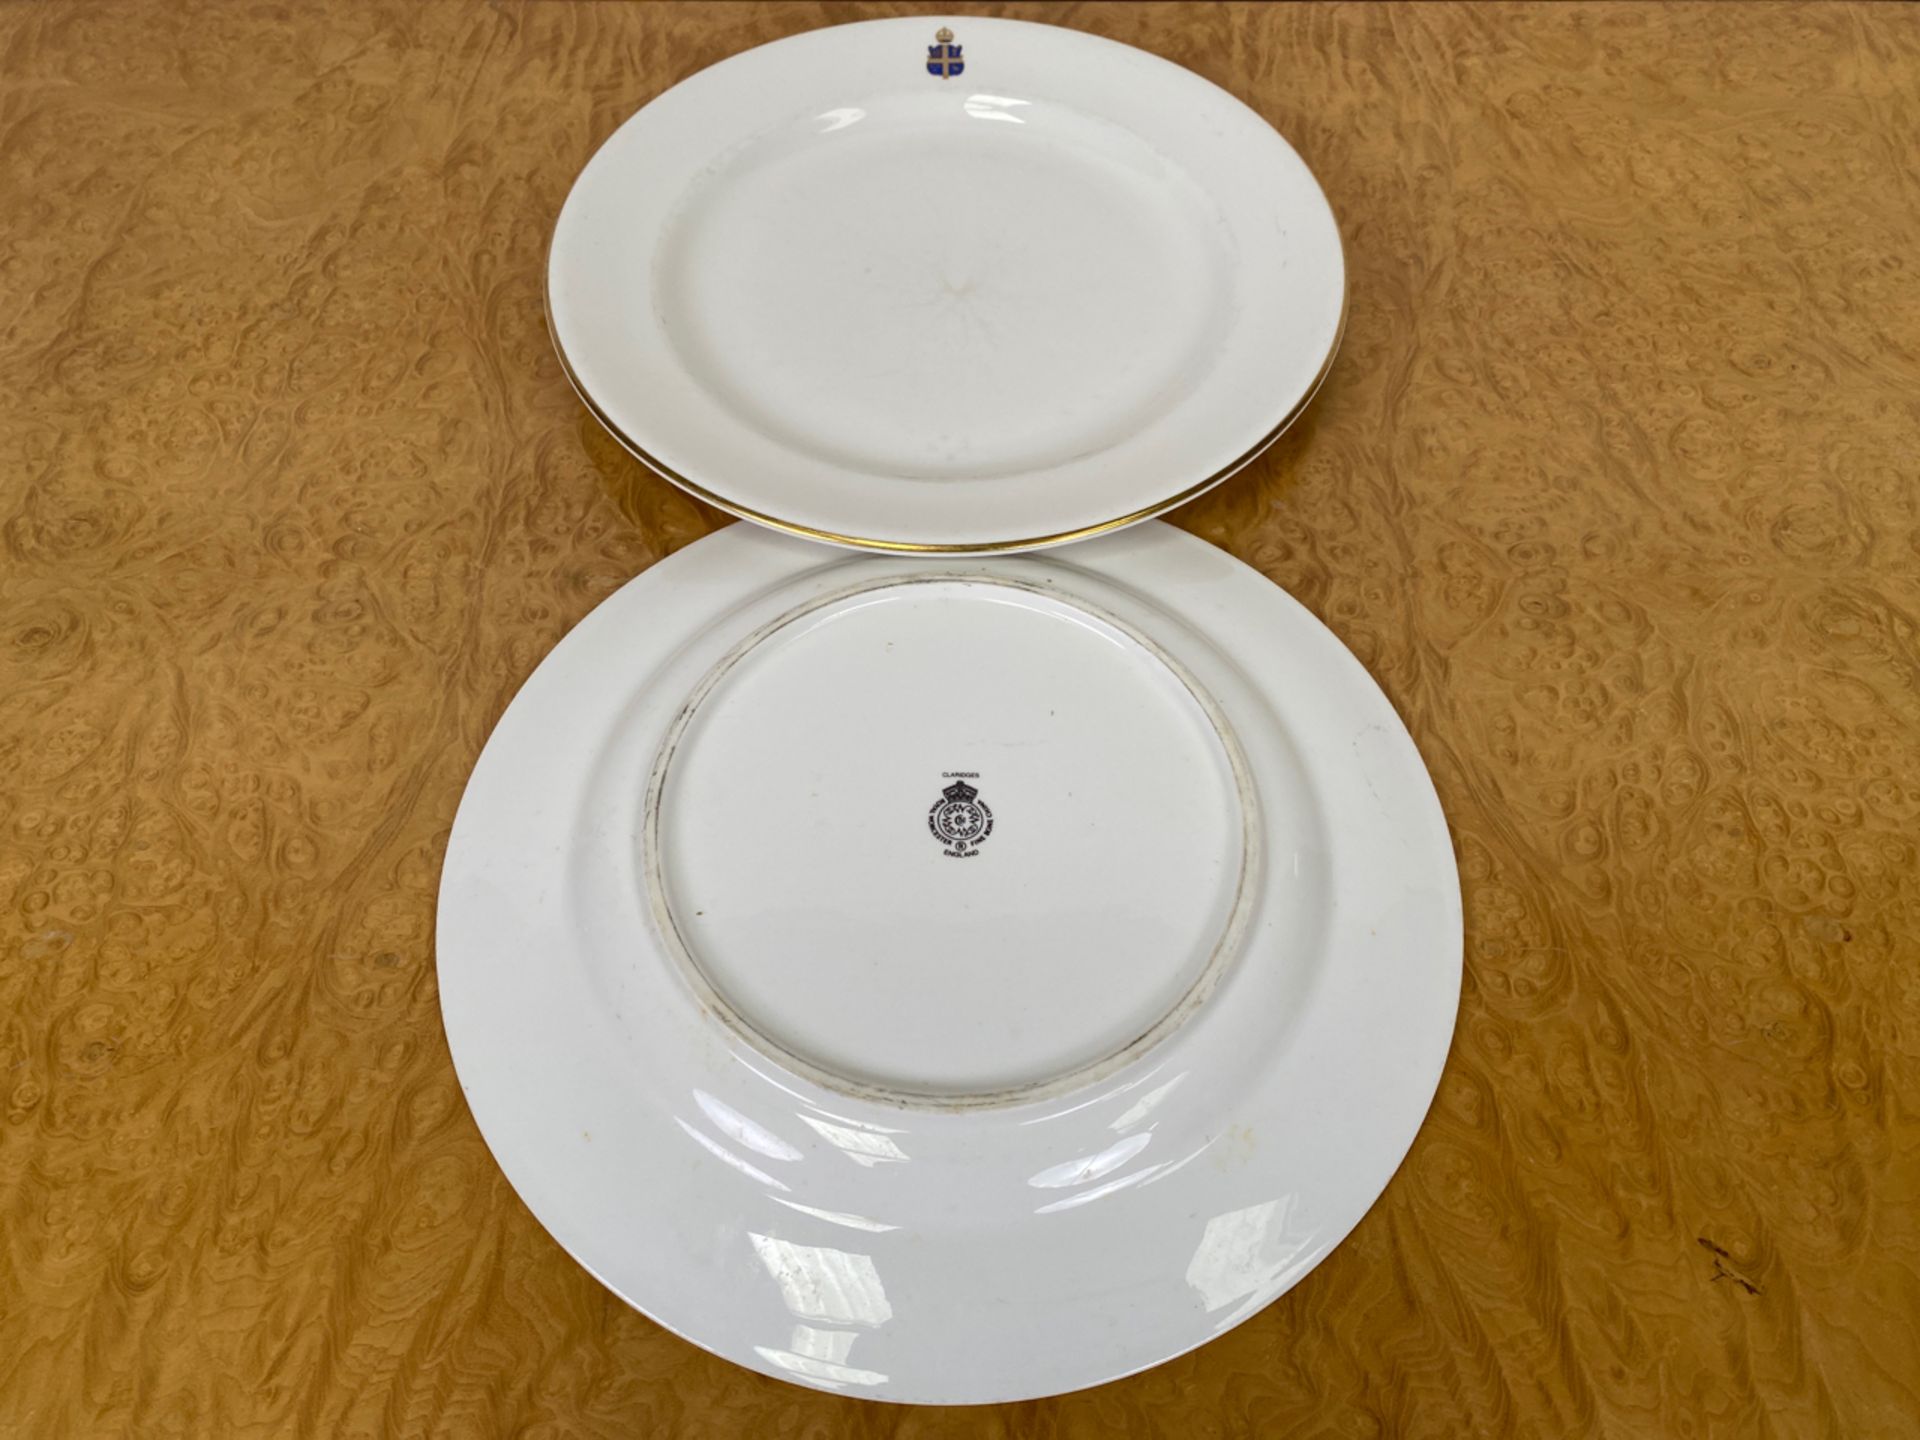 Set of Crested Crockery for Claridge's by Chommette 1884 - Image 16 of 30